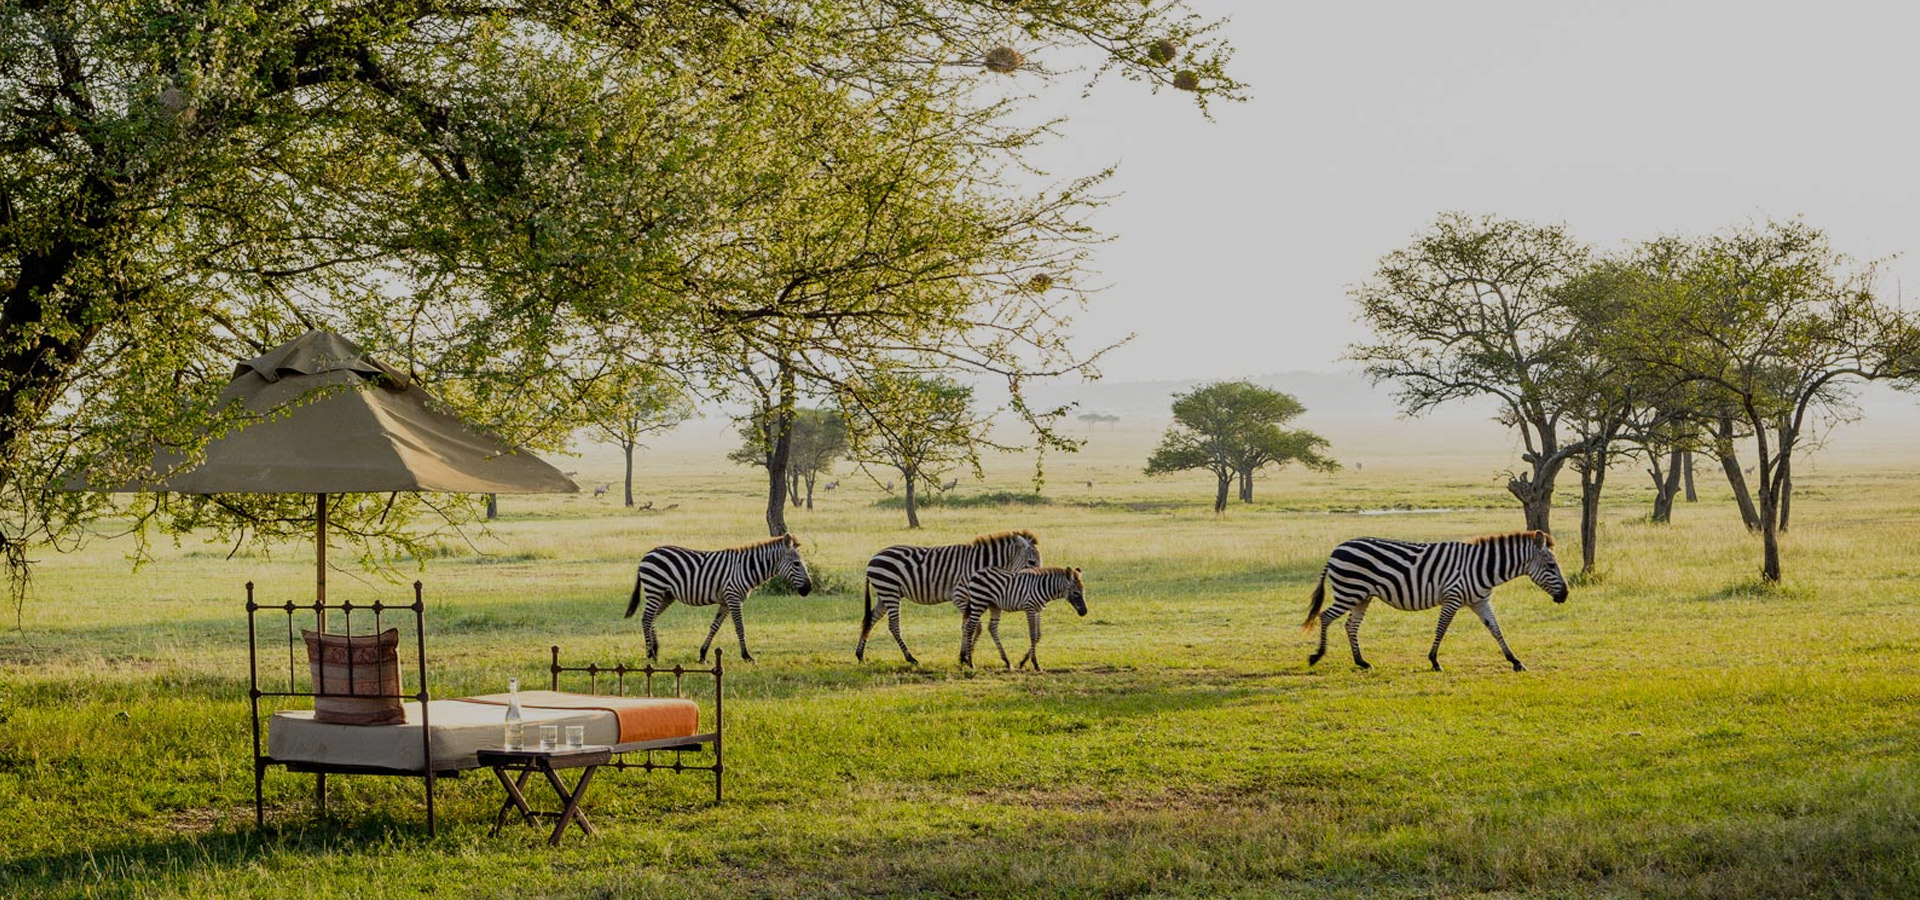 How much does the Tanzania safari cost